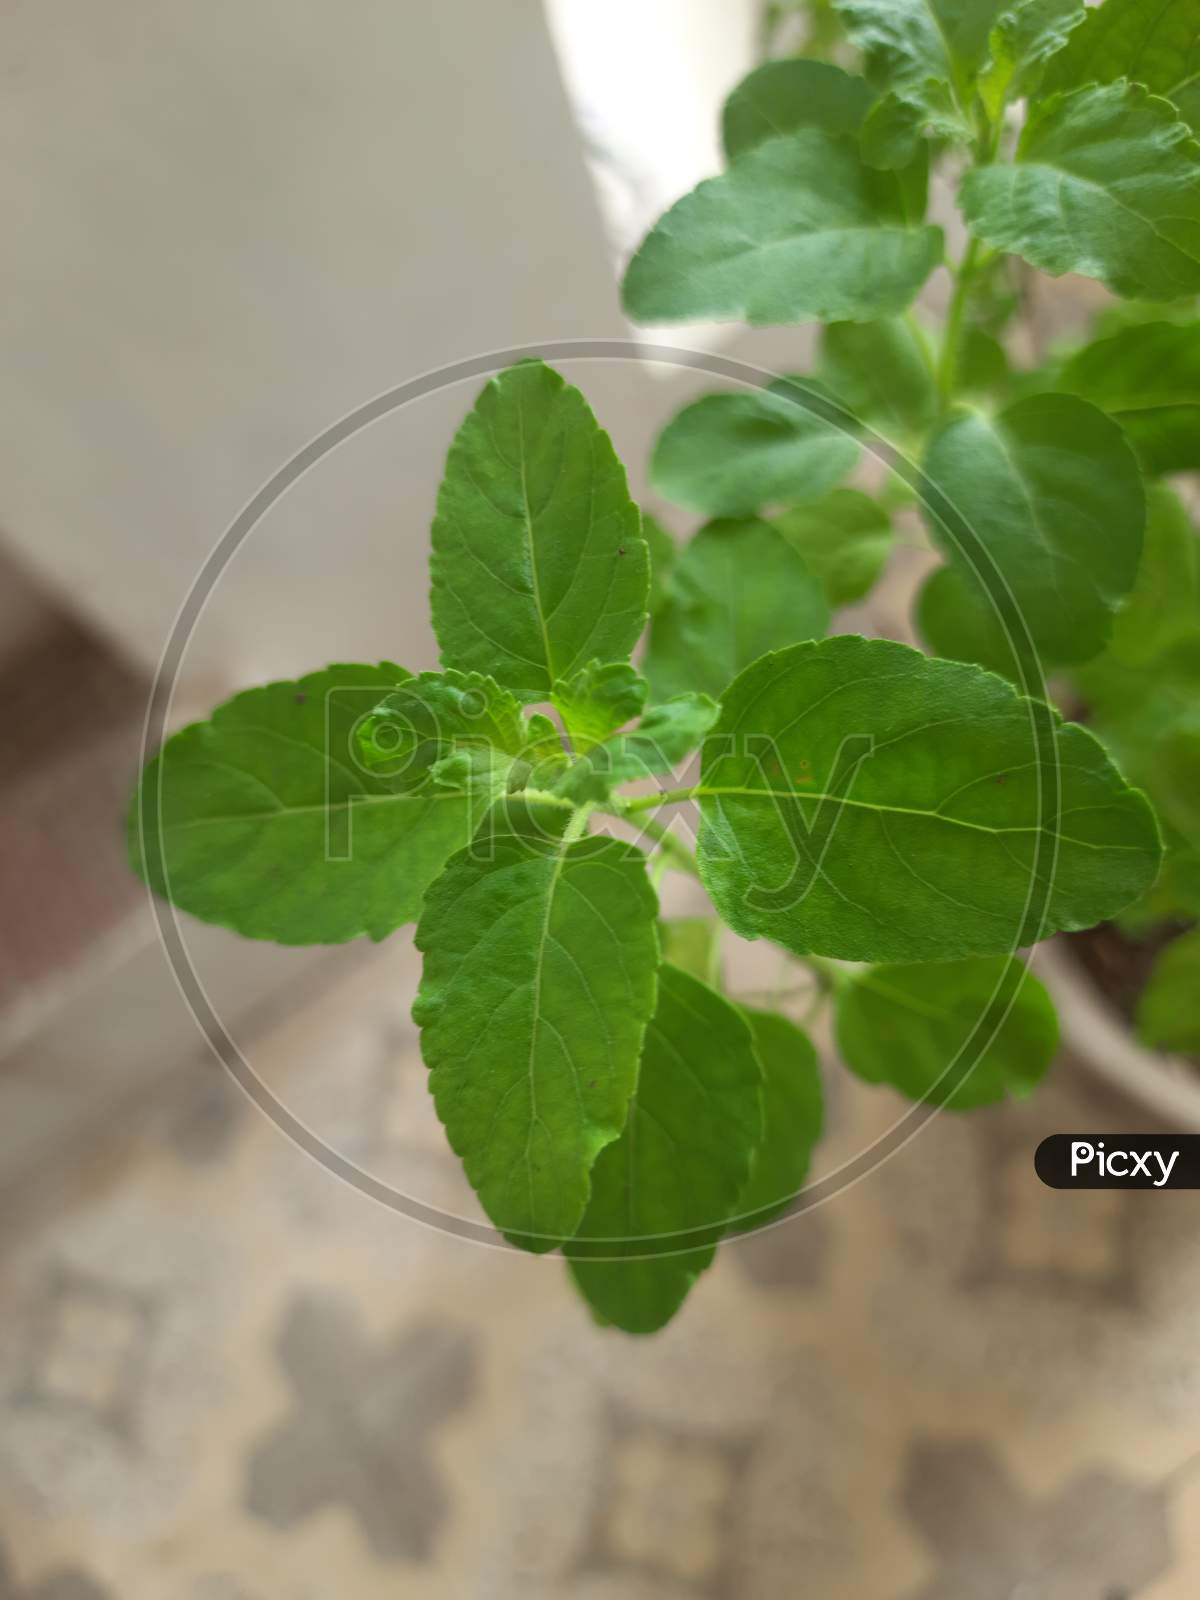 a leaves of Tulsi a medicinal holy basil plant in natural green background